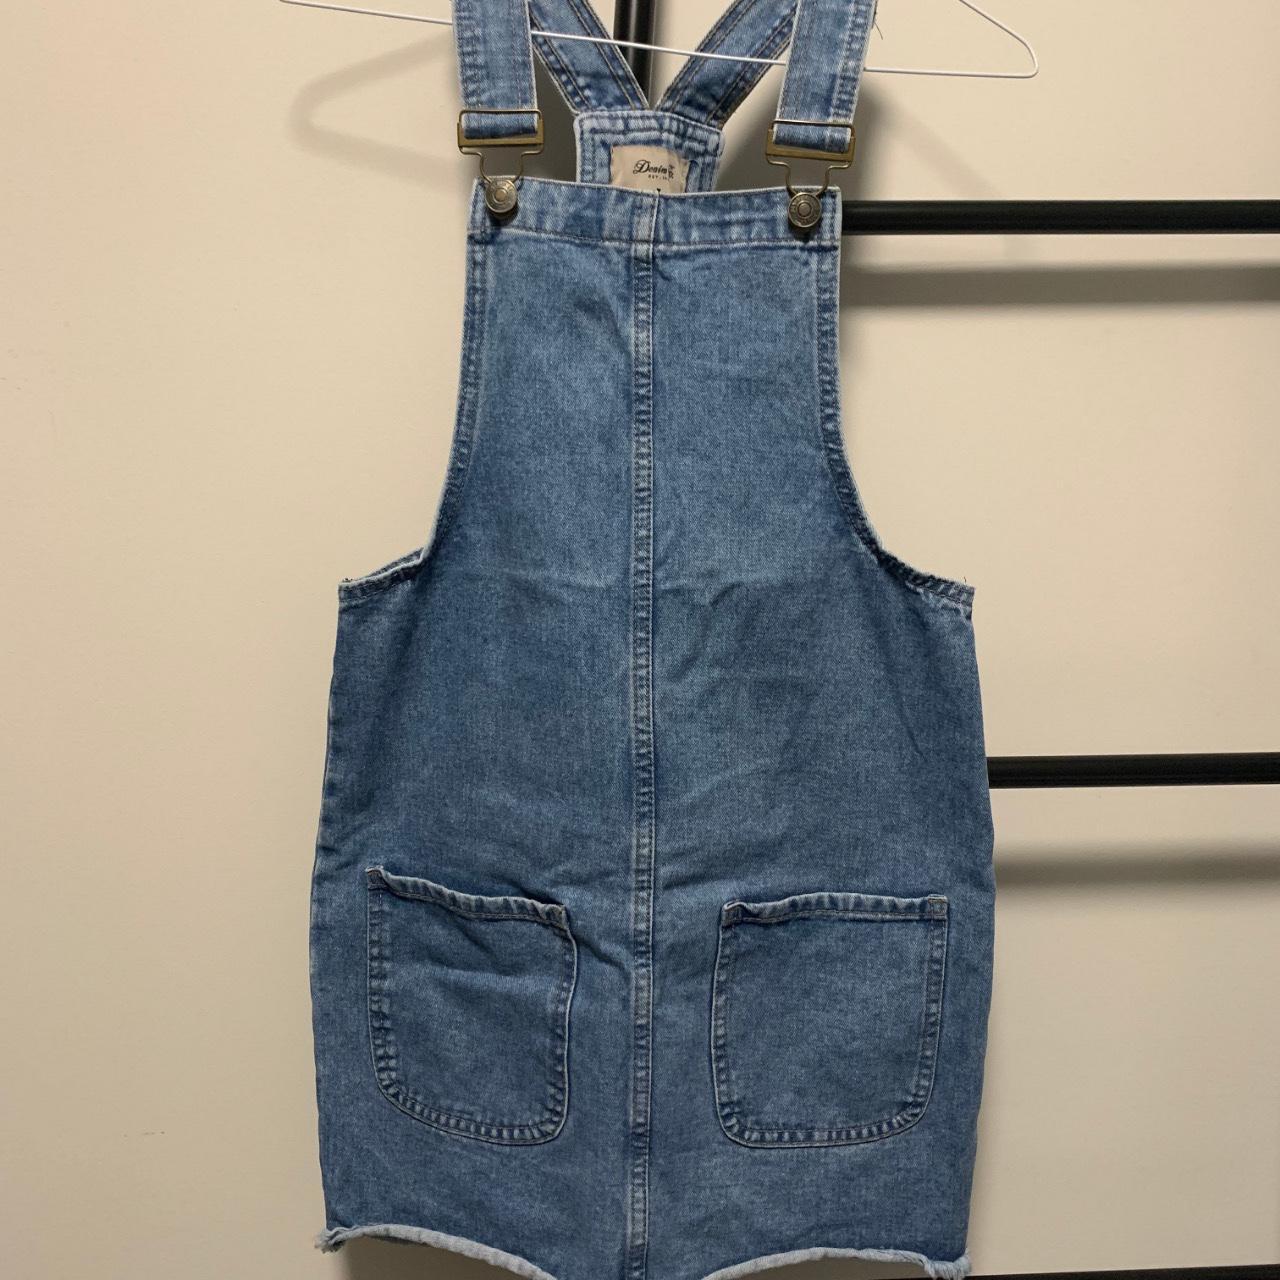 New With Tags New Look Blue Acid Wash Denim Pinafore Dress - Size 14 | eBay